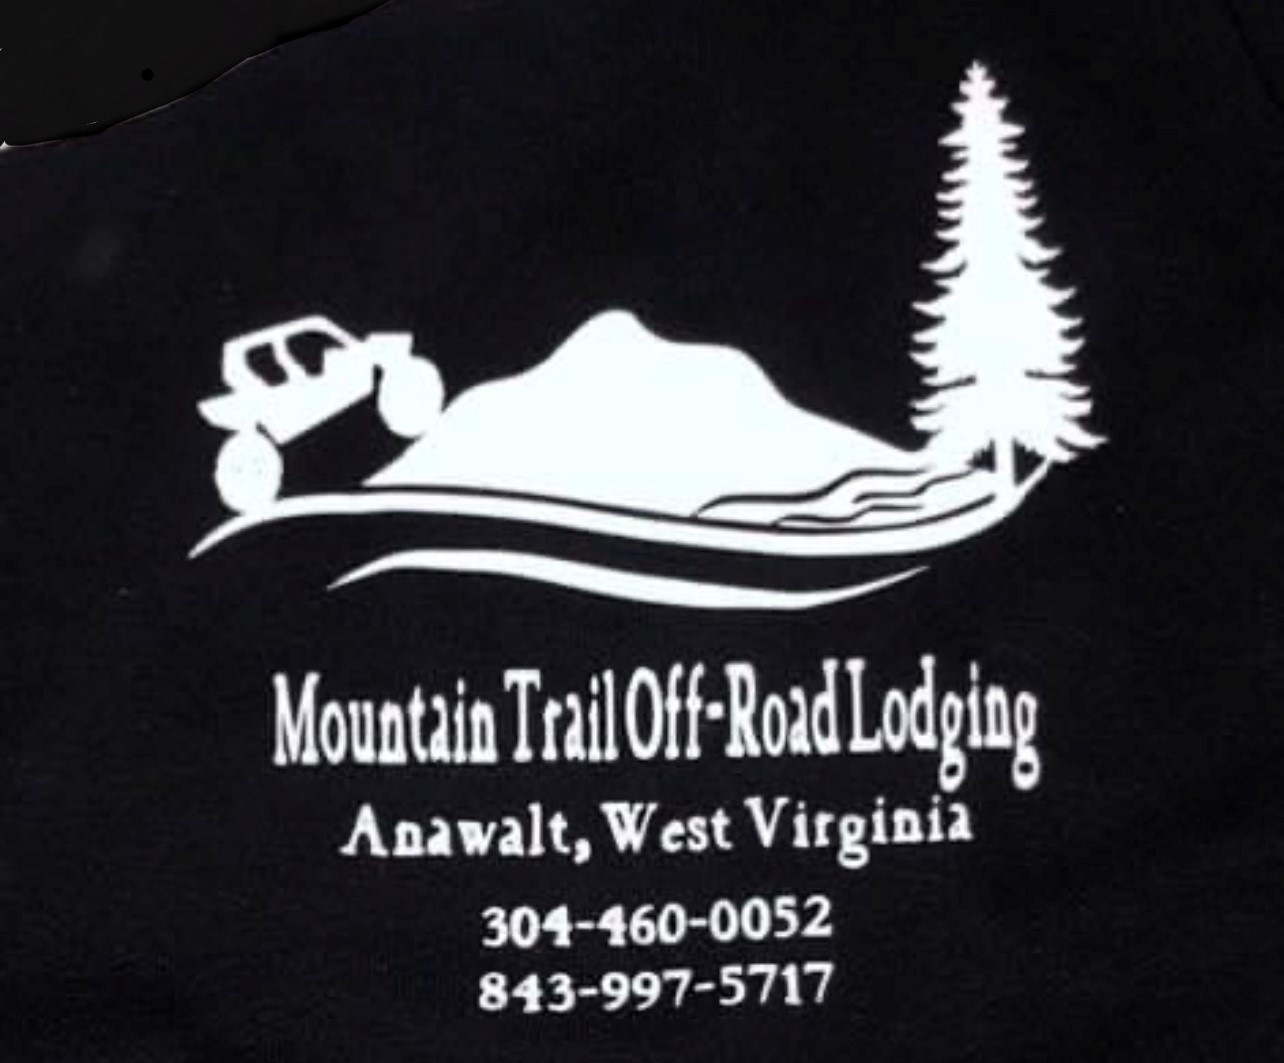 Mountain Trails Off Road Lodging Photo